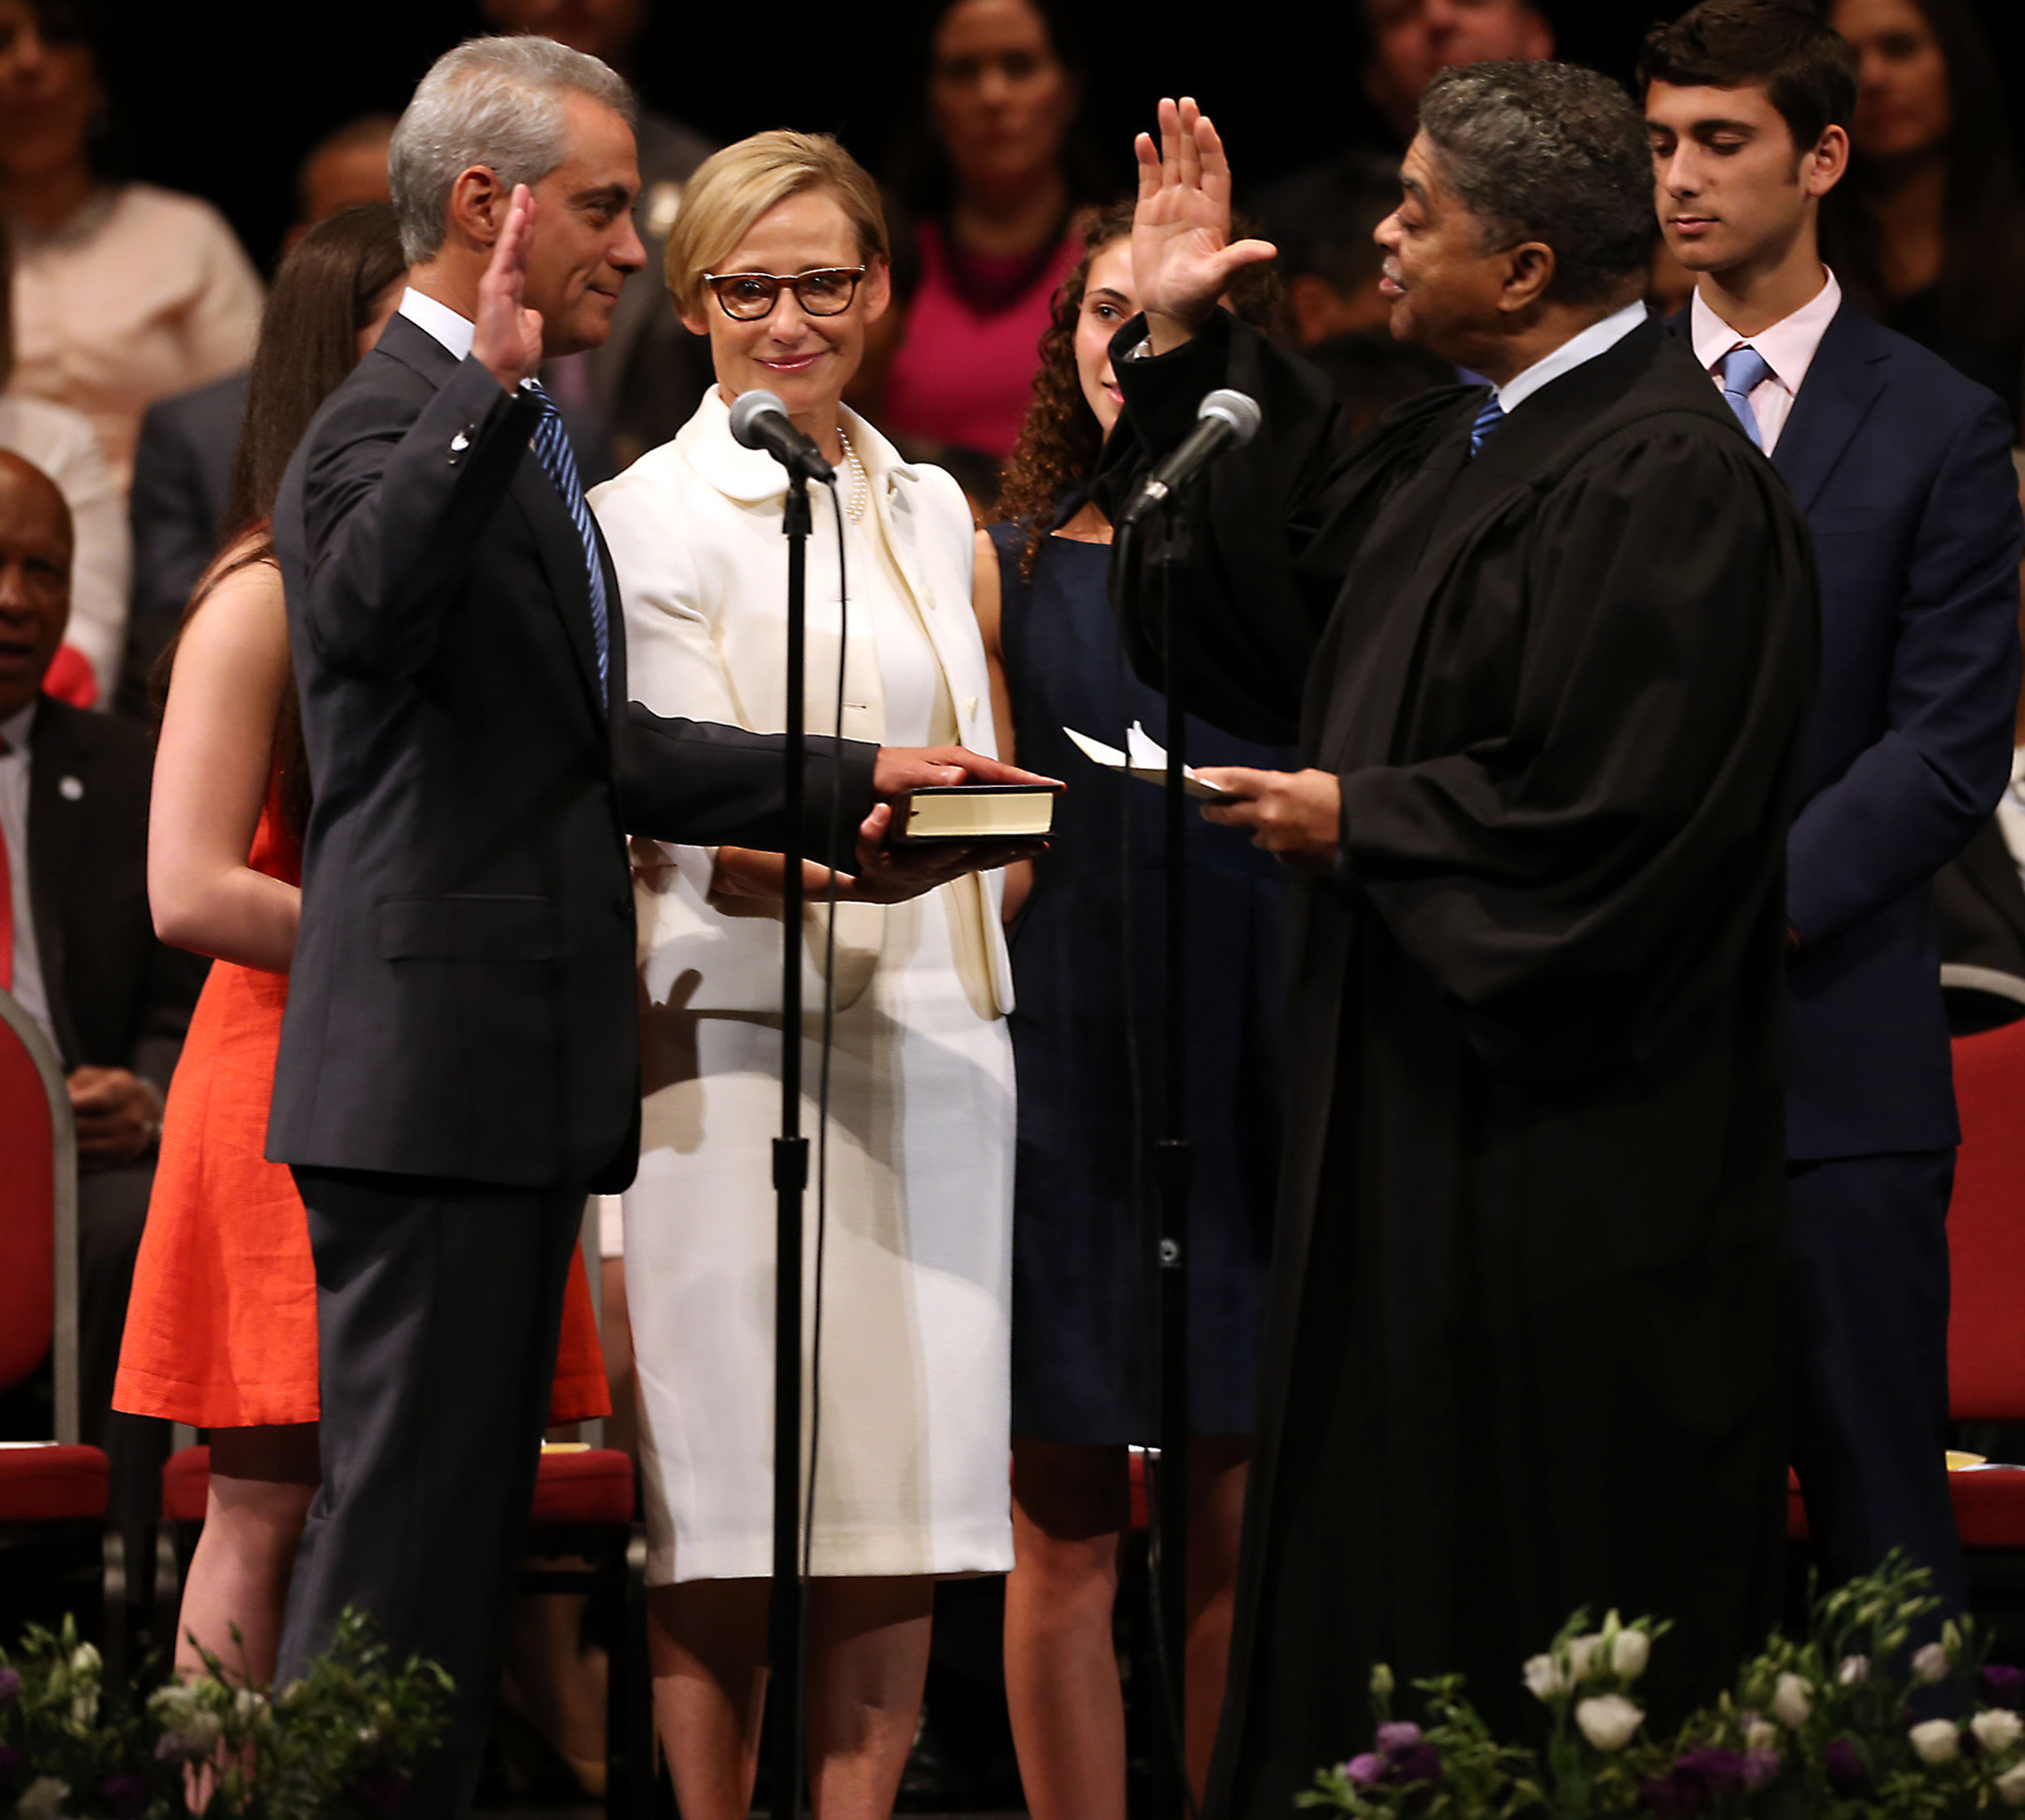 Mayor Rahm Emanuel taking the oath of office for his second term.